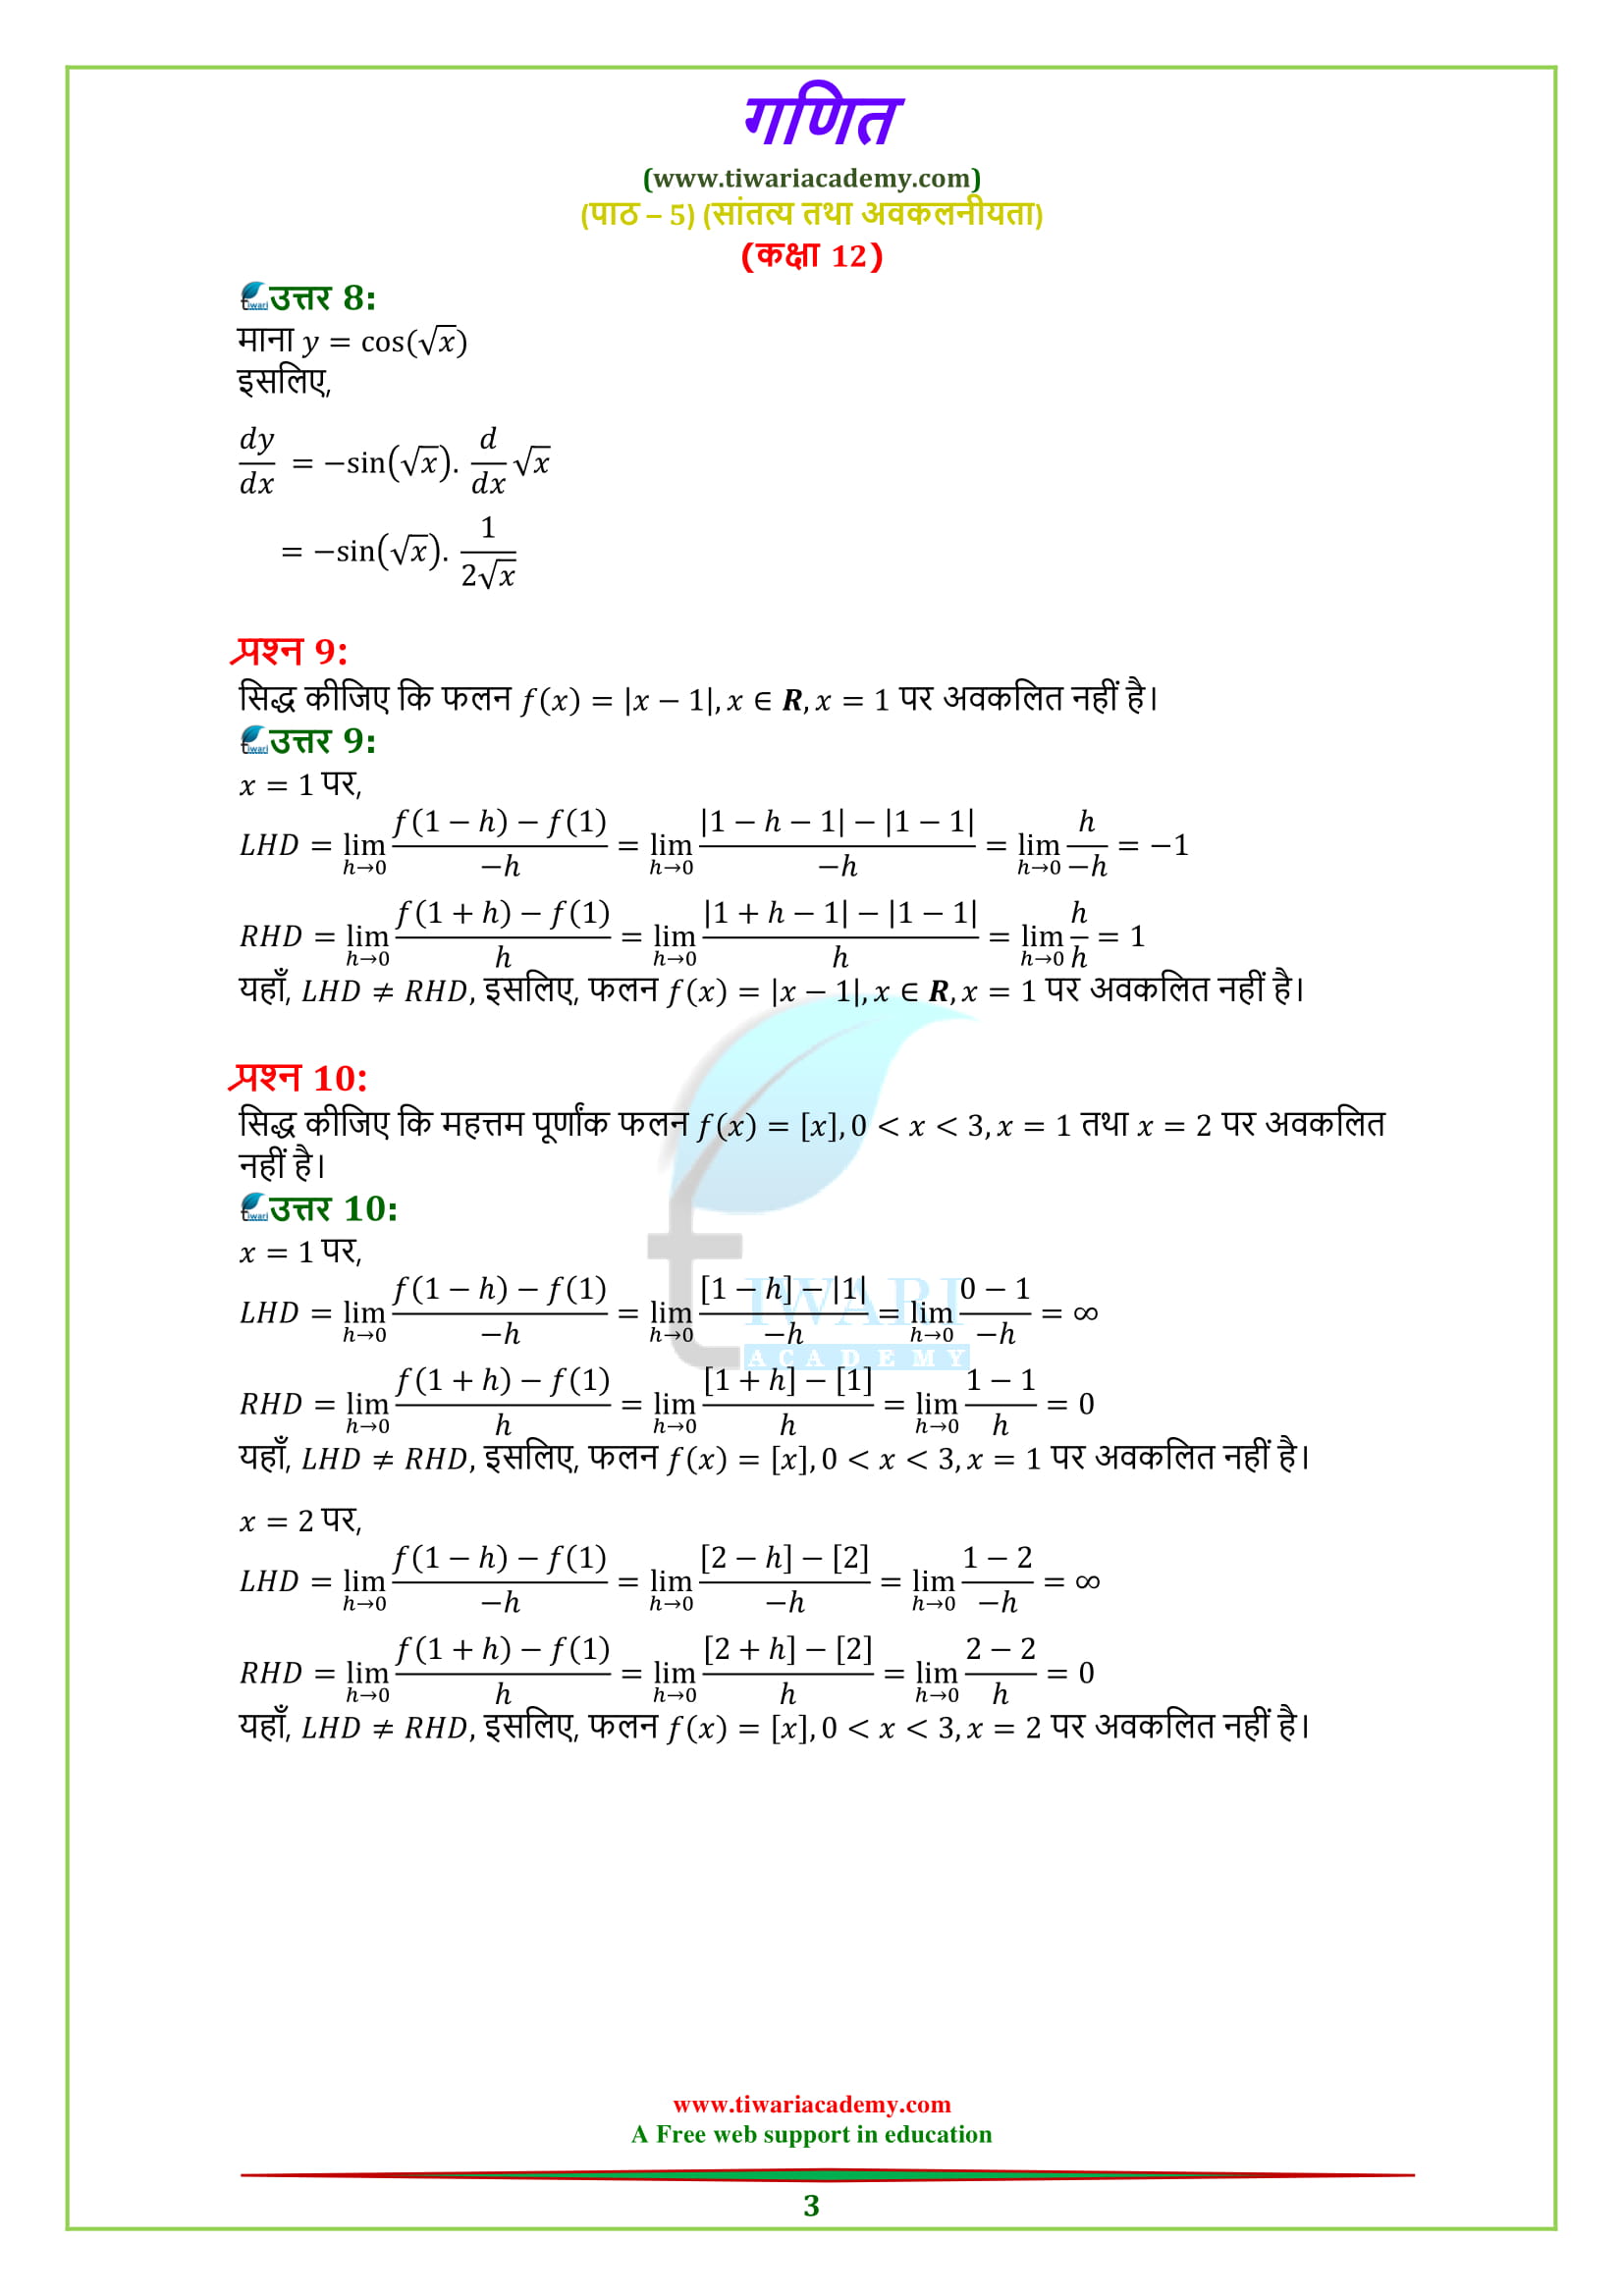 12 Maths Chapter 5 Exercise 5.2 Continuity and Differentiability all questions answers for 2018-19